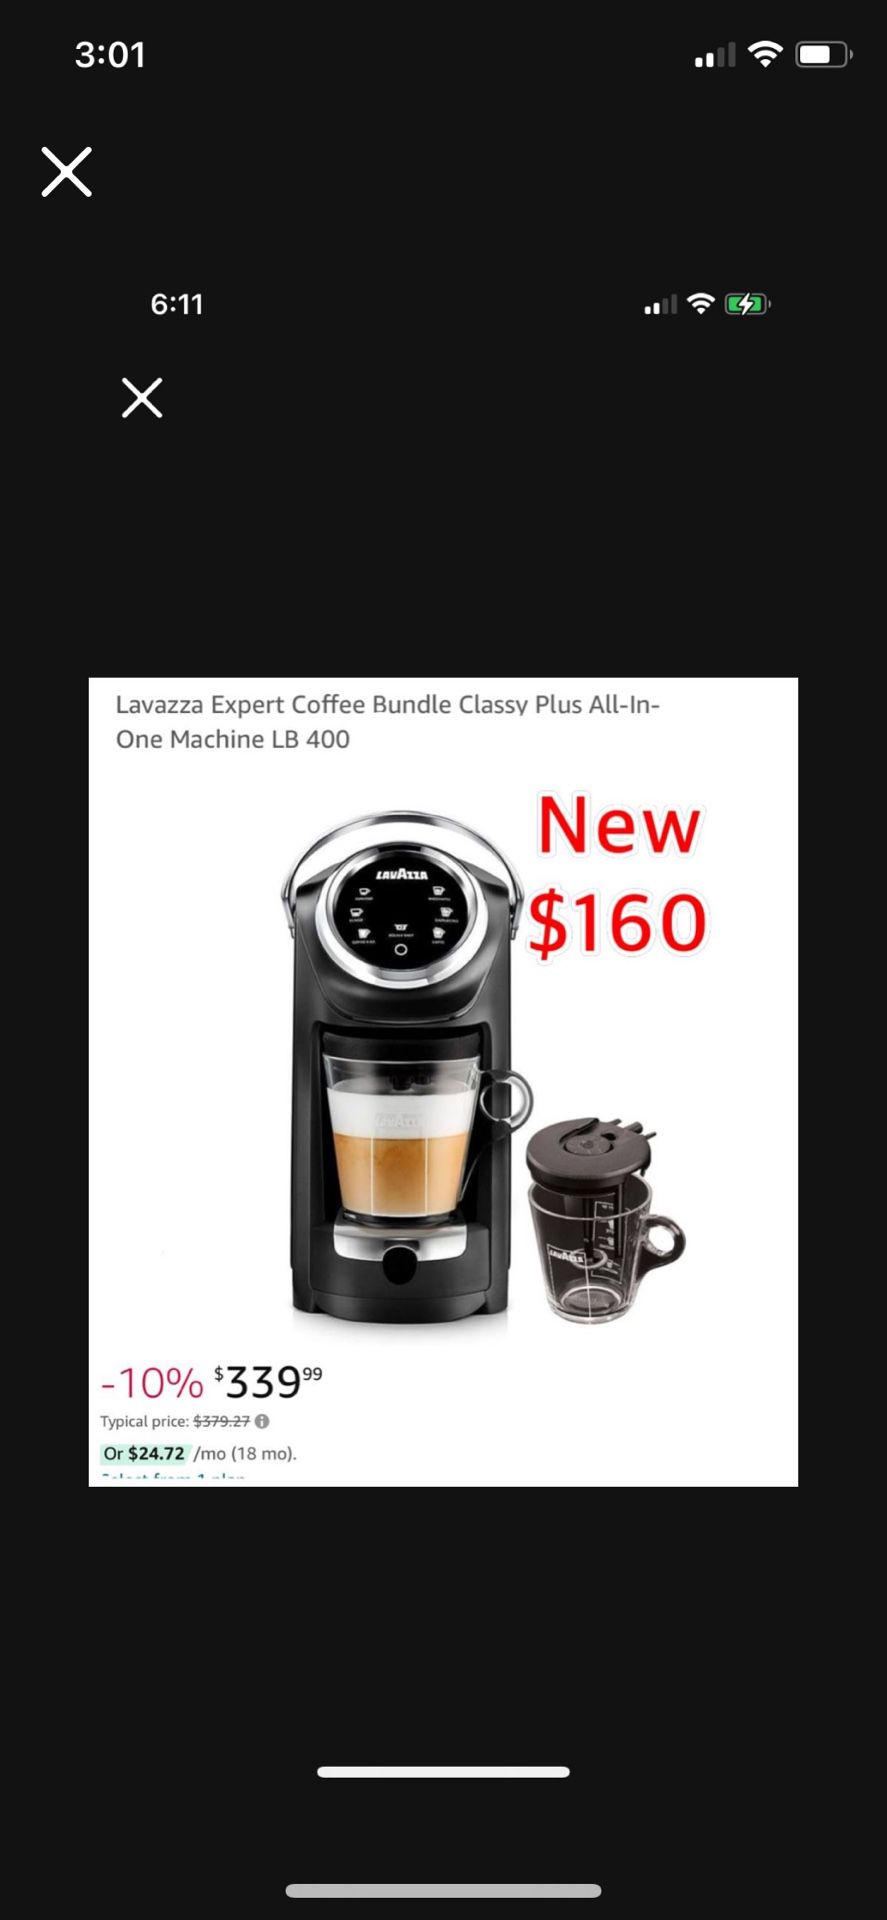 New Lavazza expert coffee machine compact $160  East Palmdale  we will open box to make sure it’s new & complete when bought  No returns no refunds 